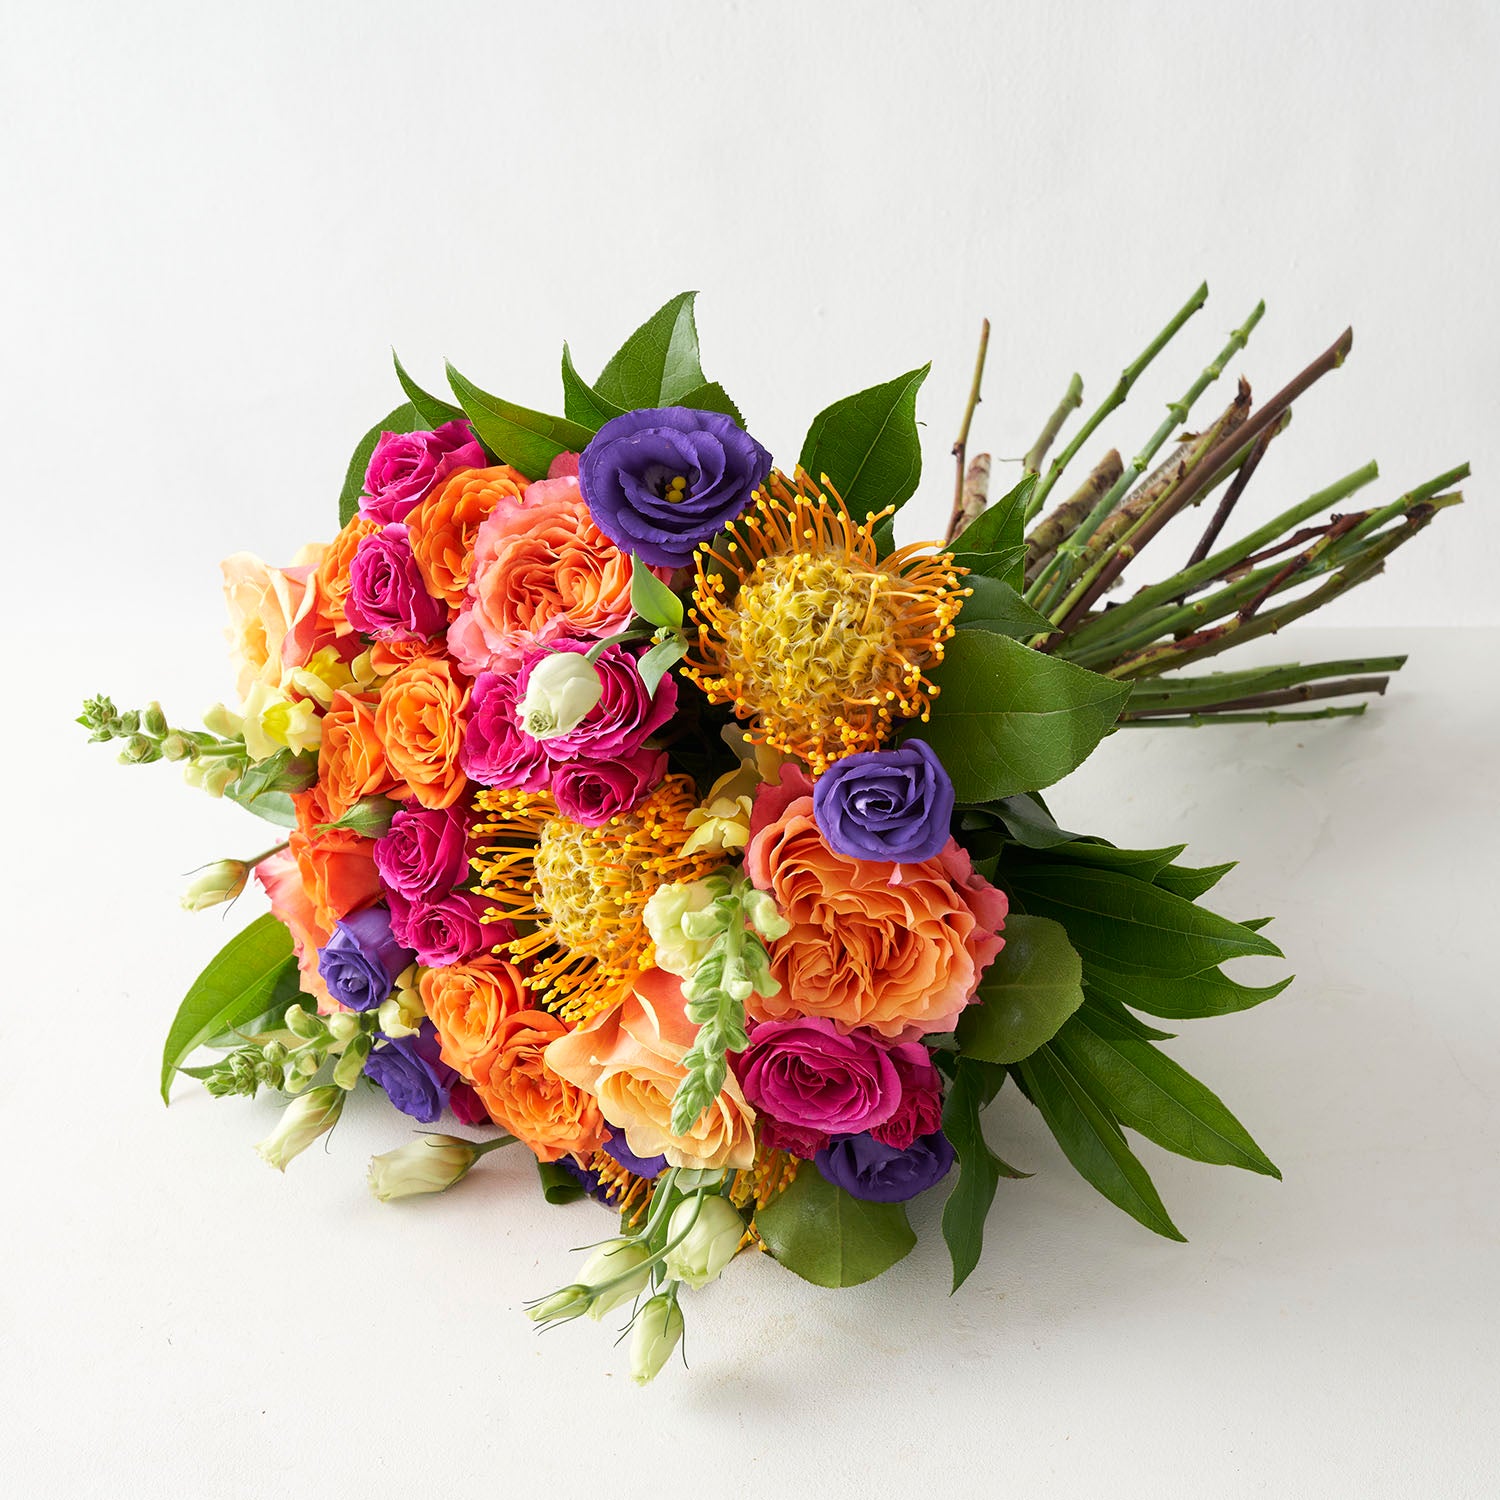 Round handtied bouquet with orange free spirit roses, dark purple lisianthus, hot pink spray roses, and gold protea on white background.